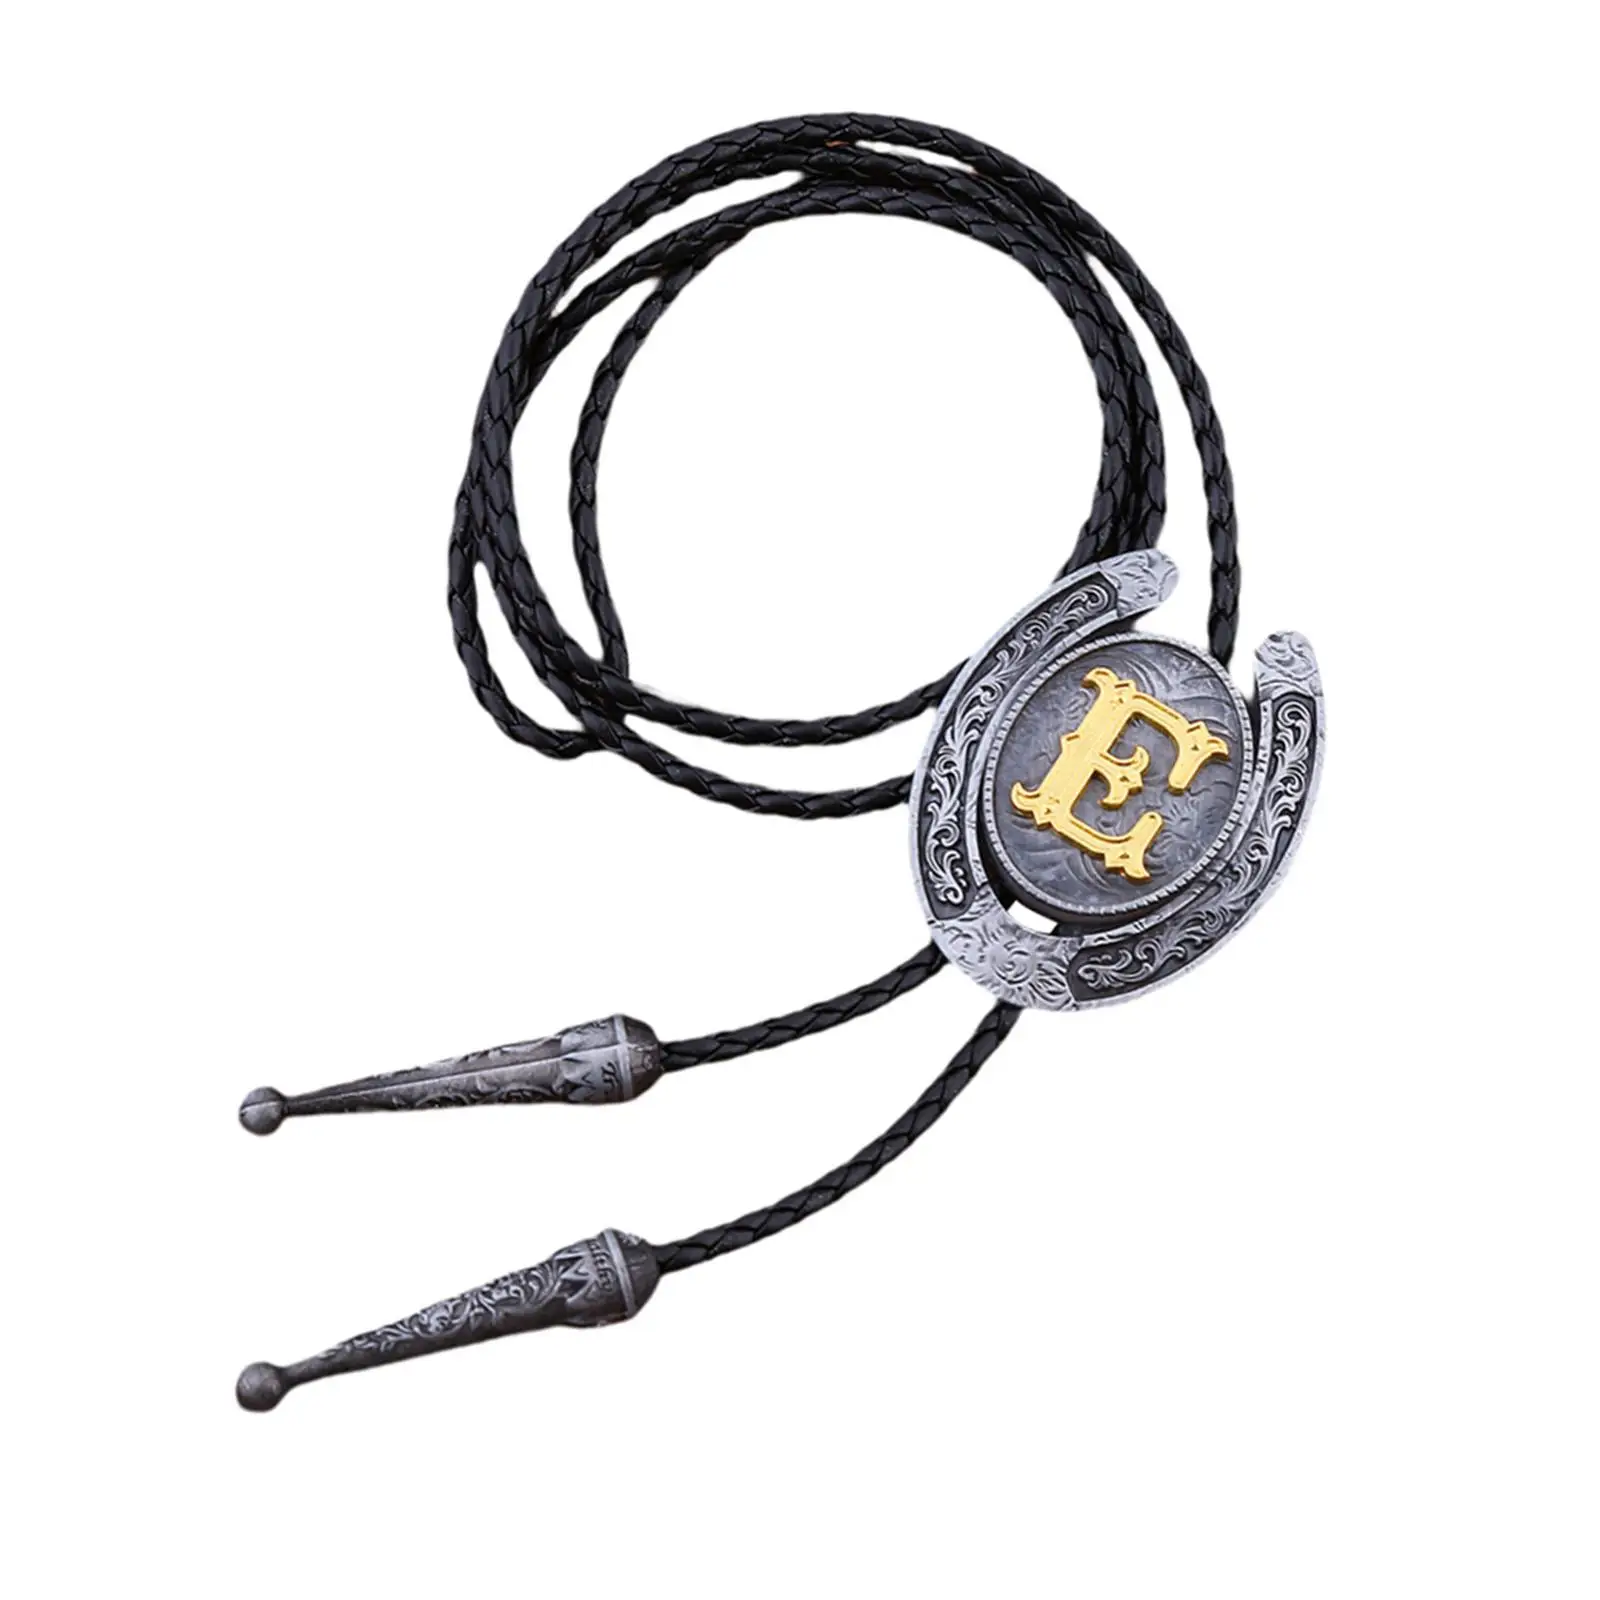 Stylish Cowboy Bolo Tie Costume Accessory Decorative for Holiday Dresses